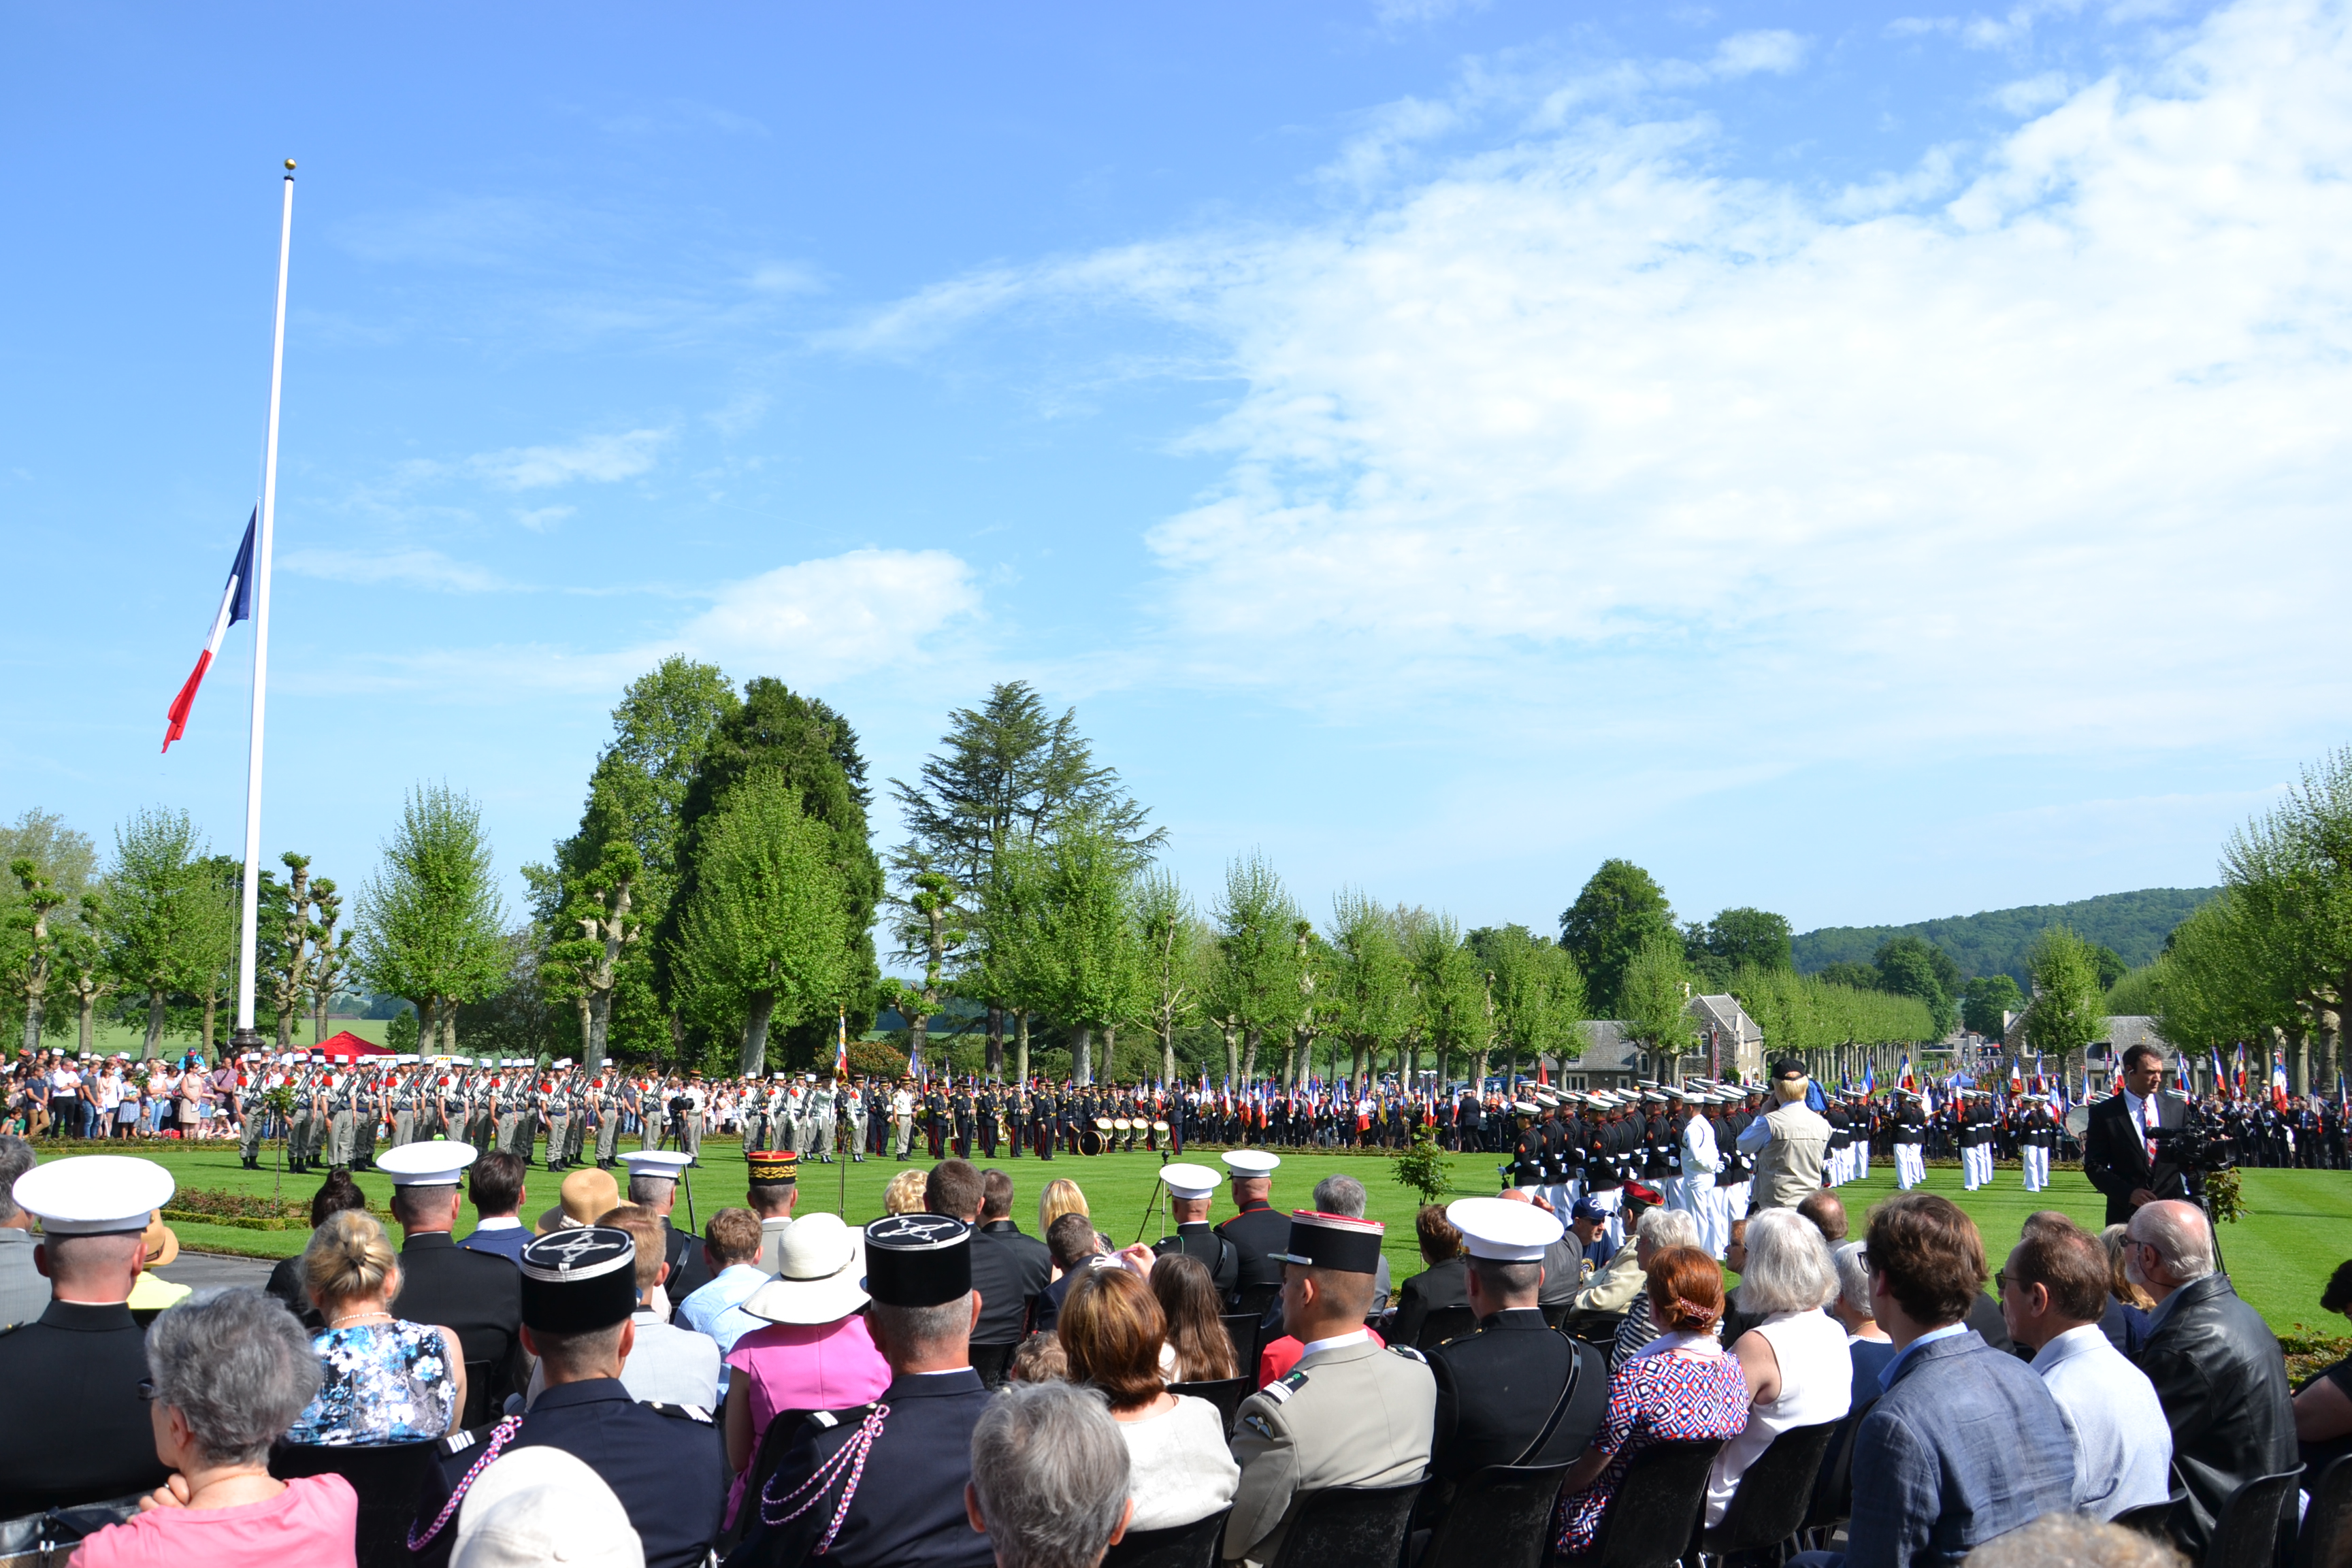 Attendees sit as they watch members of the military participate in the ceremony.